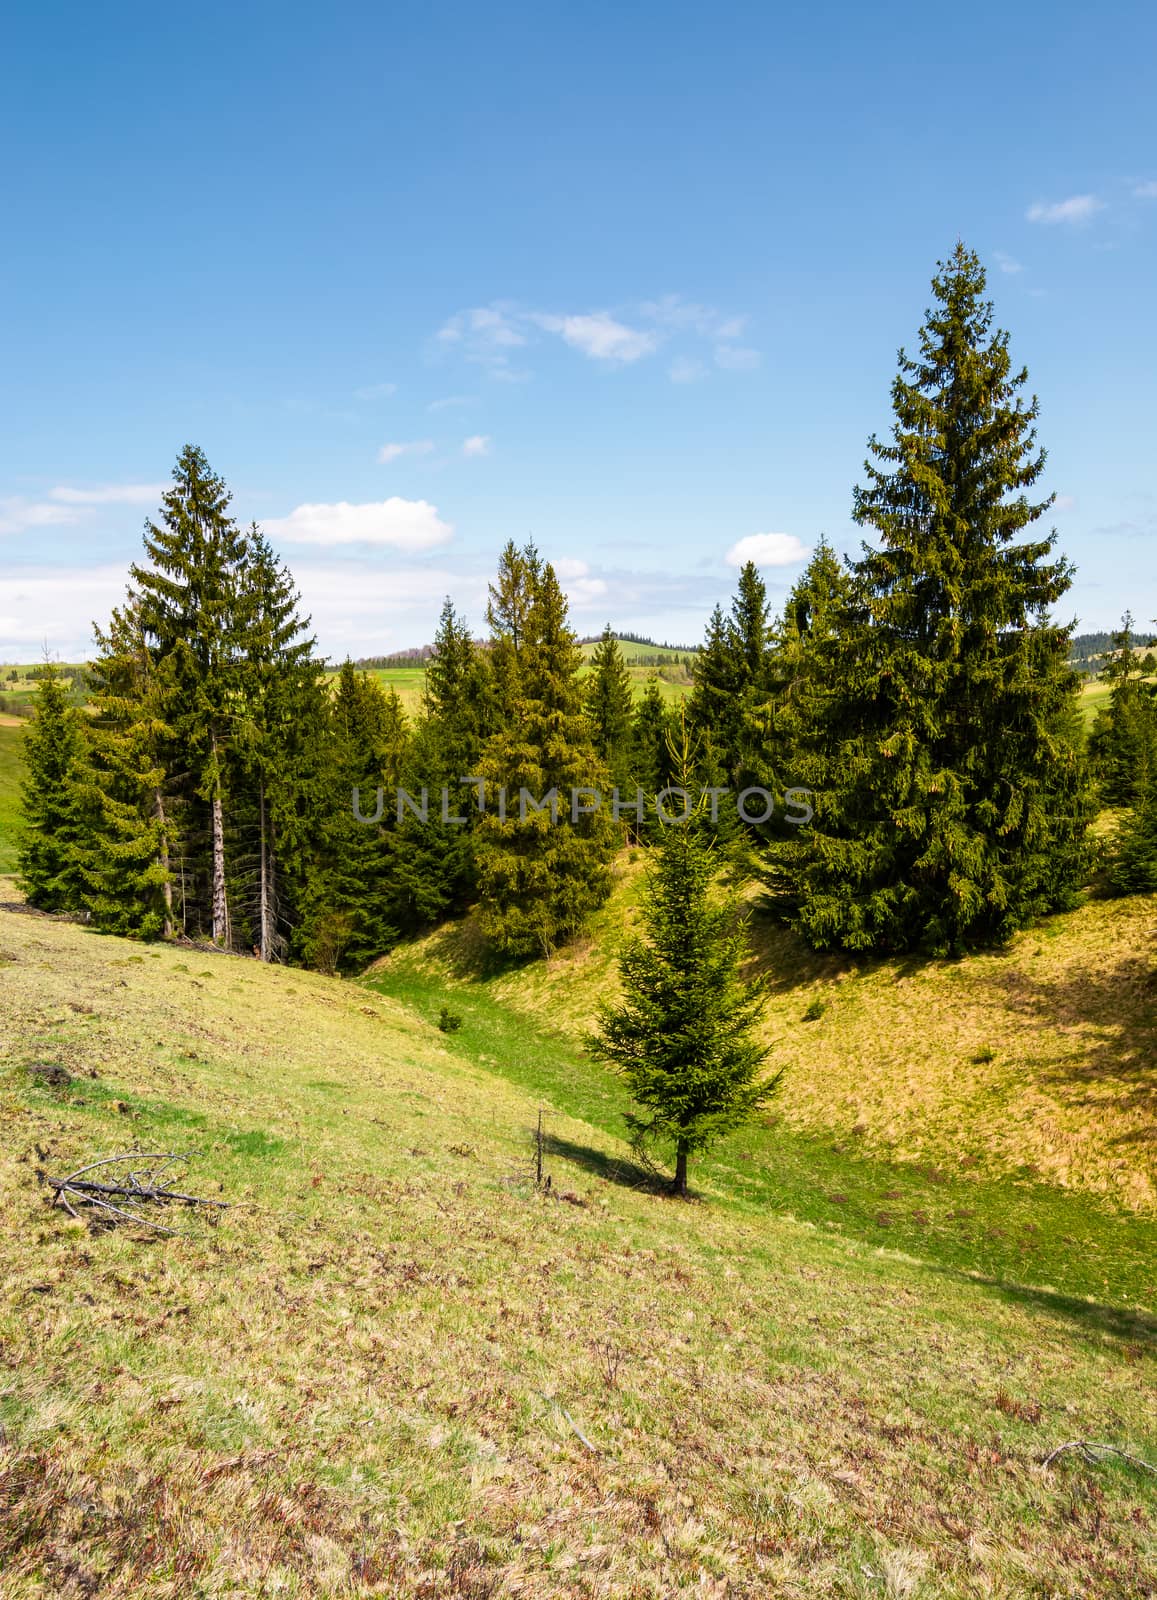 spruce forest on grassy hills. beautiful mountainous landscape in springtime on a sunny day